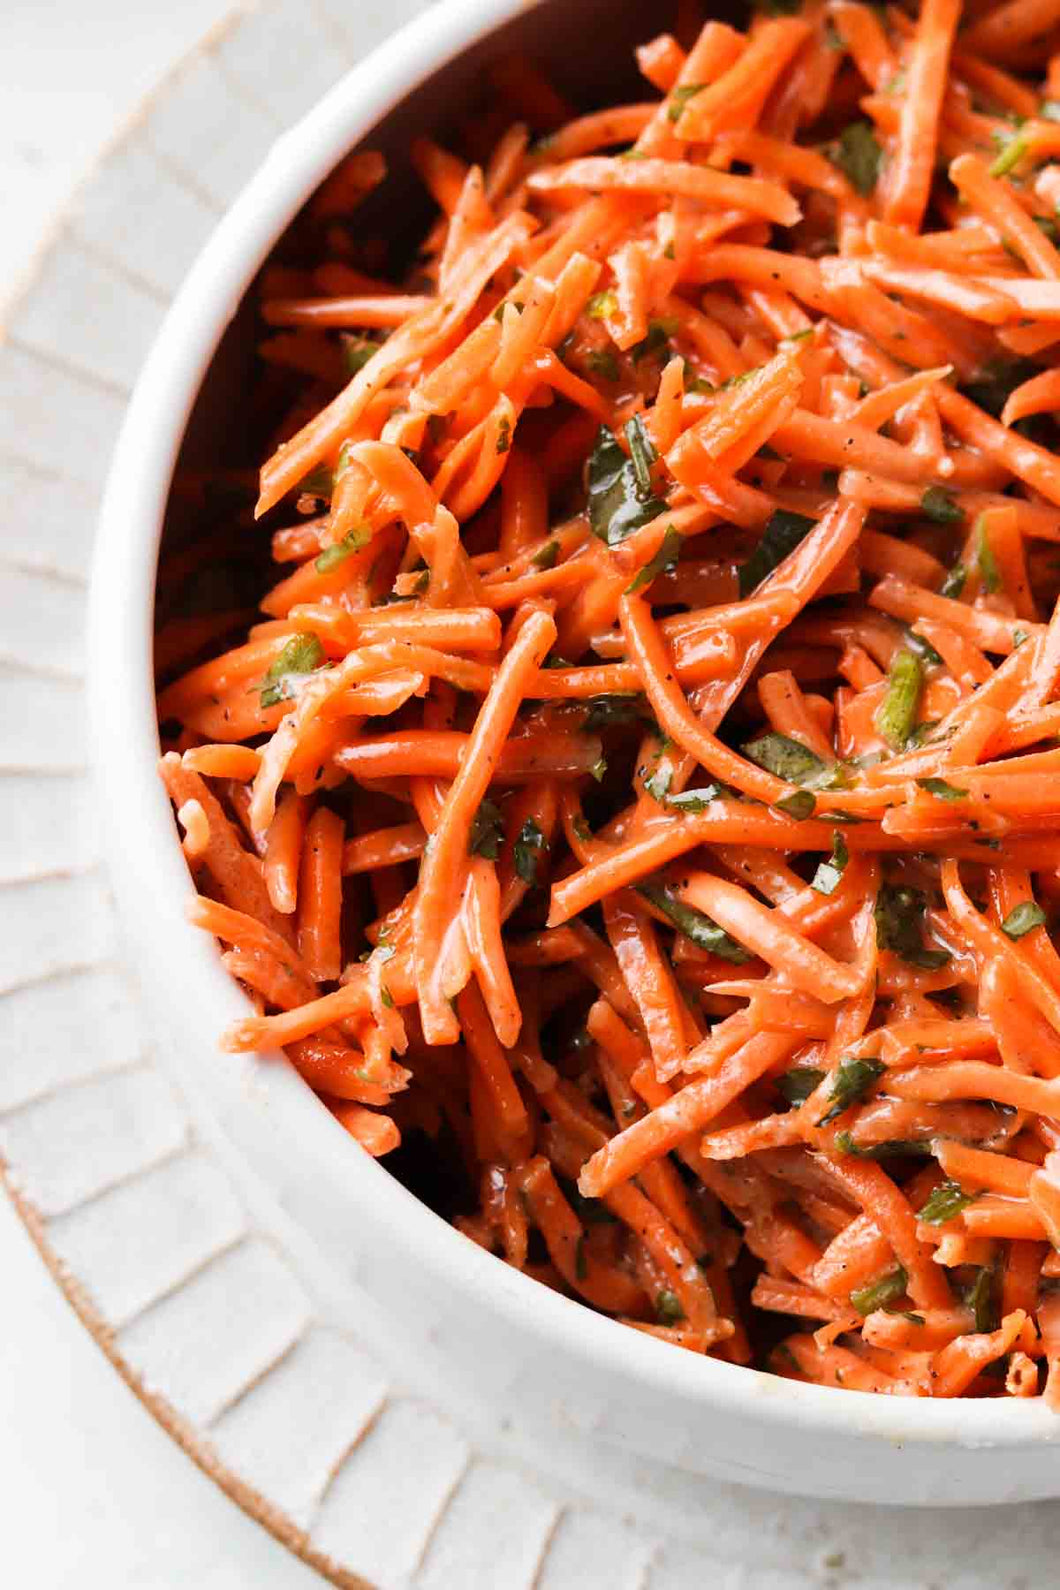 NEW! Container of Chick-Fil-A Carrot Salad